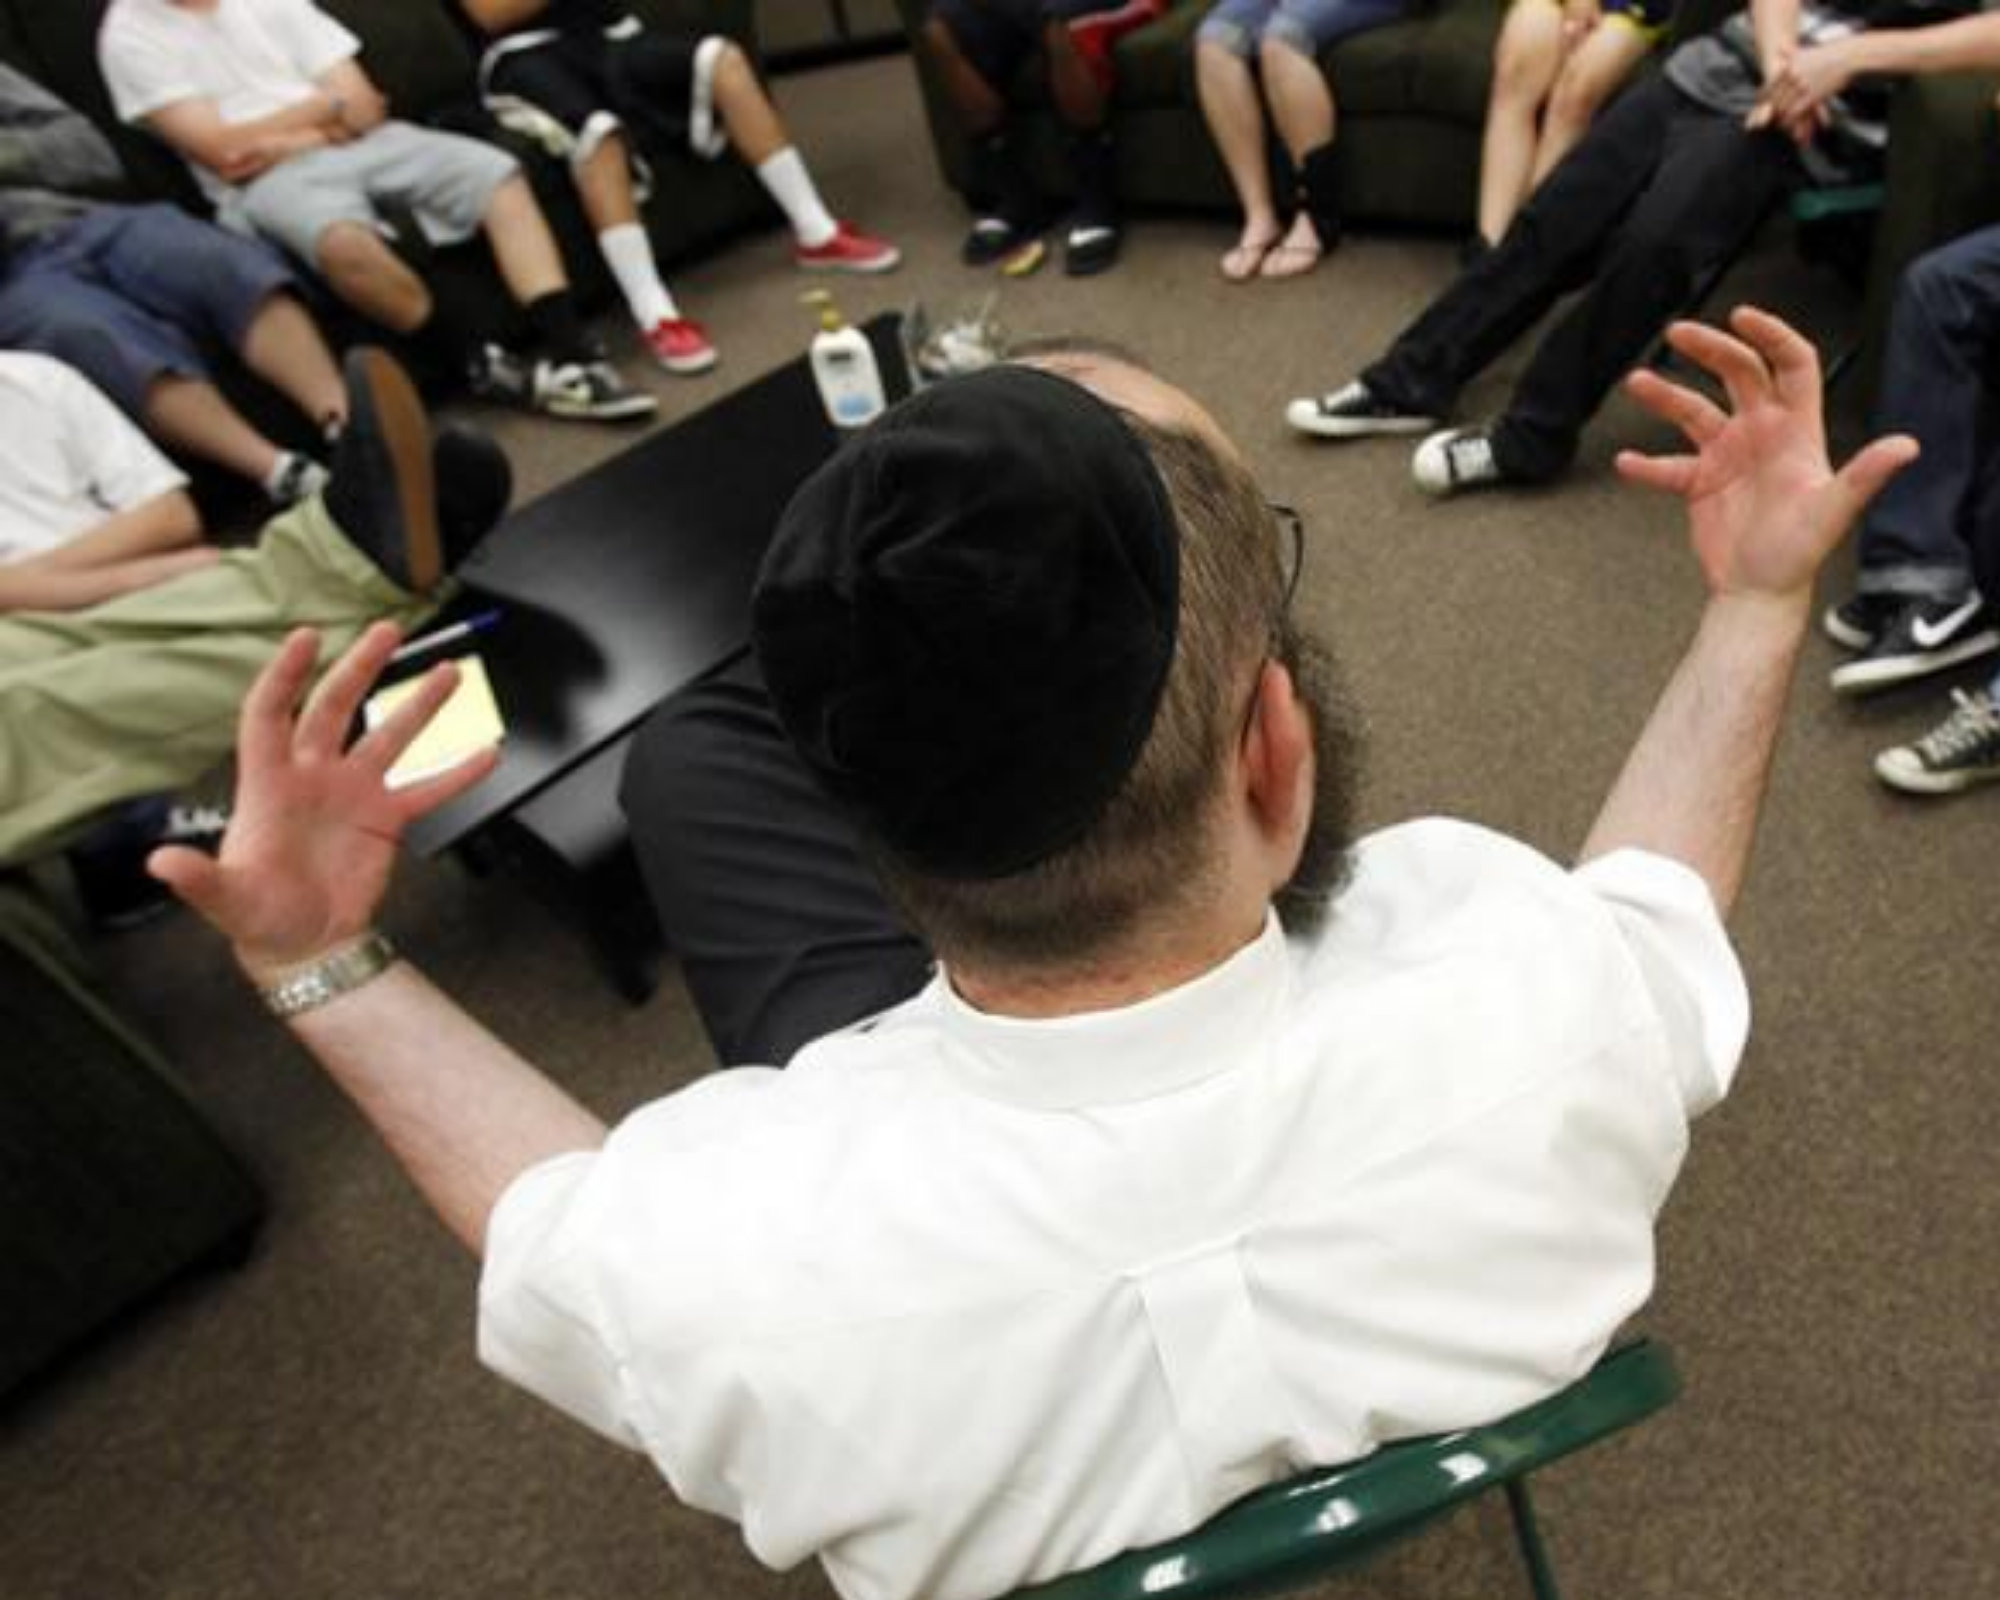 Image of a Rabbi offering Group Therapy s part of Kosher Recovery